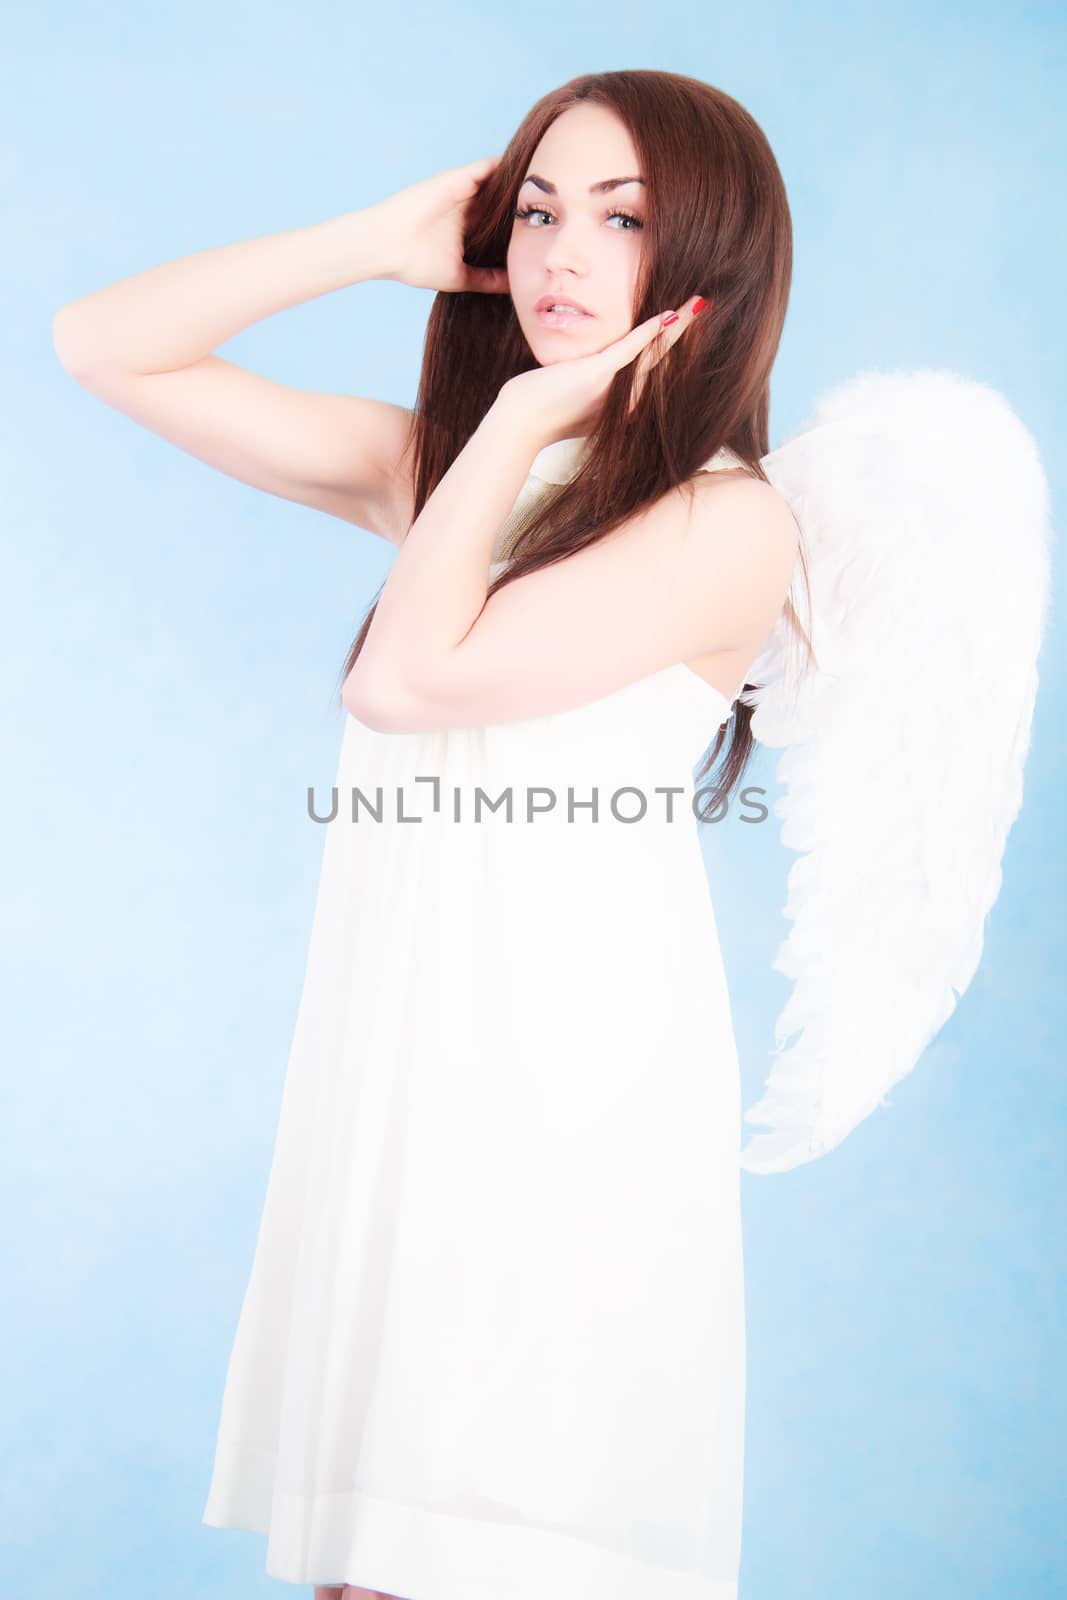 Beautiful young angel over cyan background